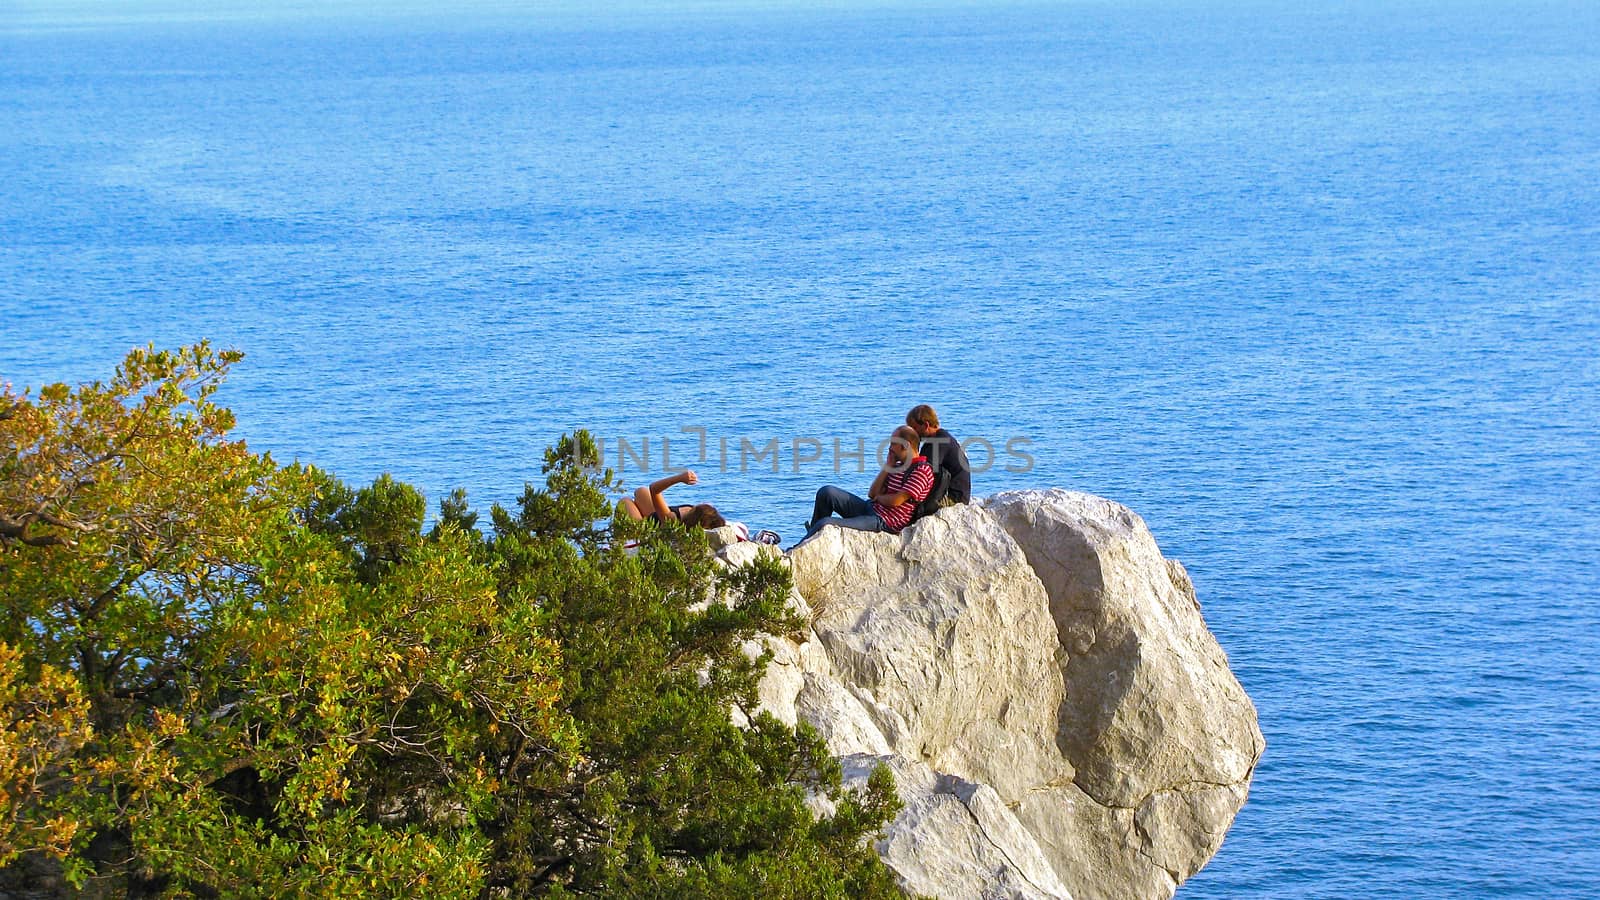 A group of people settled down to rest on a rock above the sea